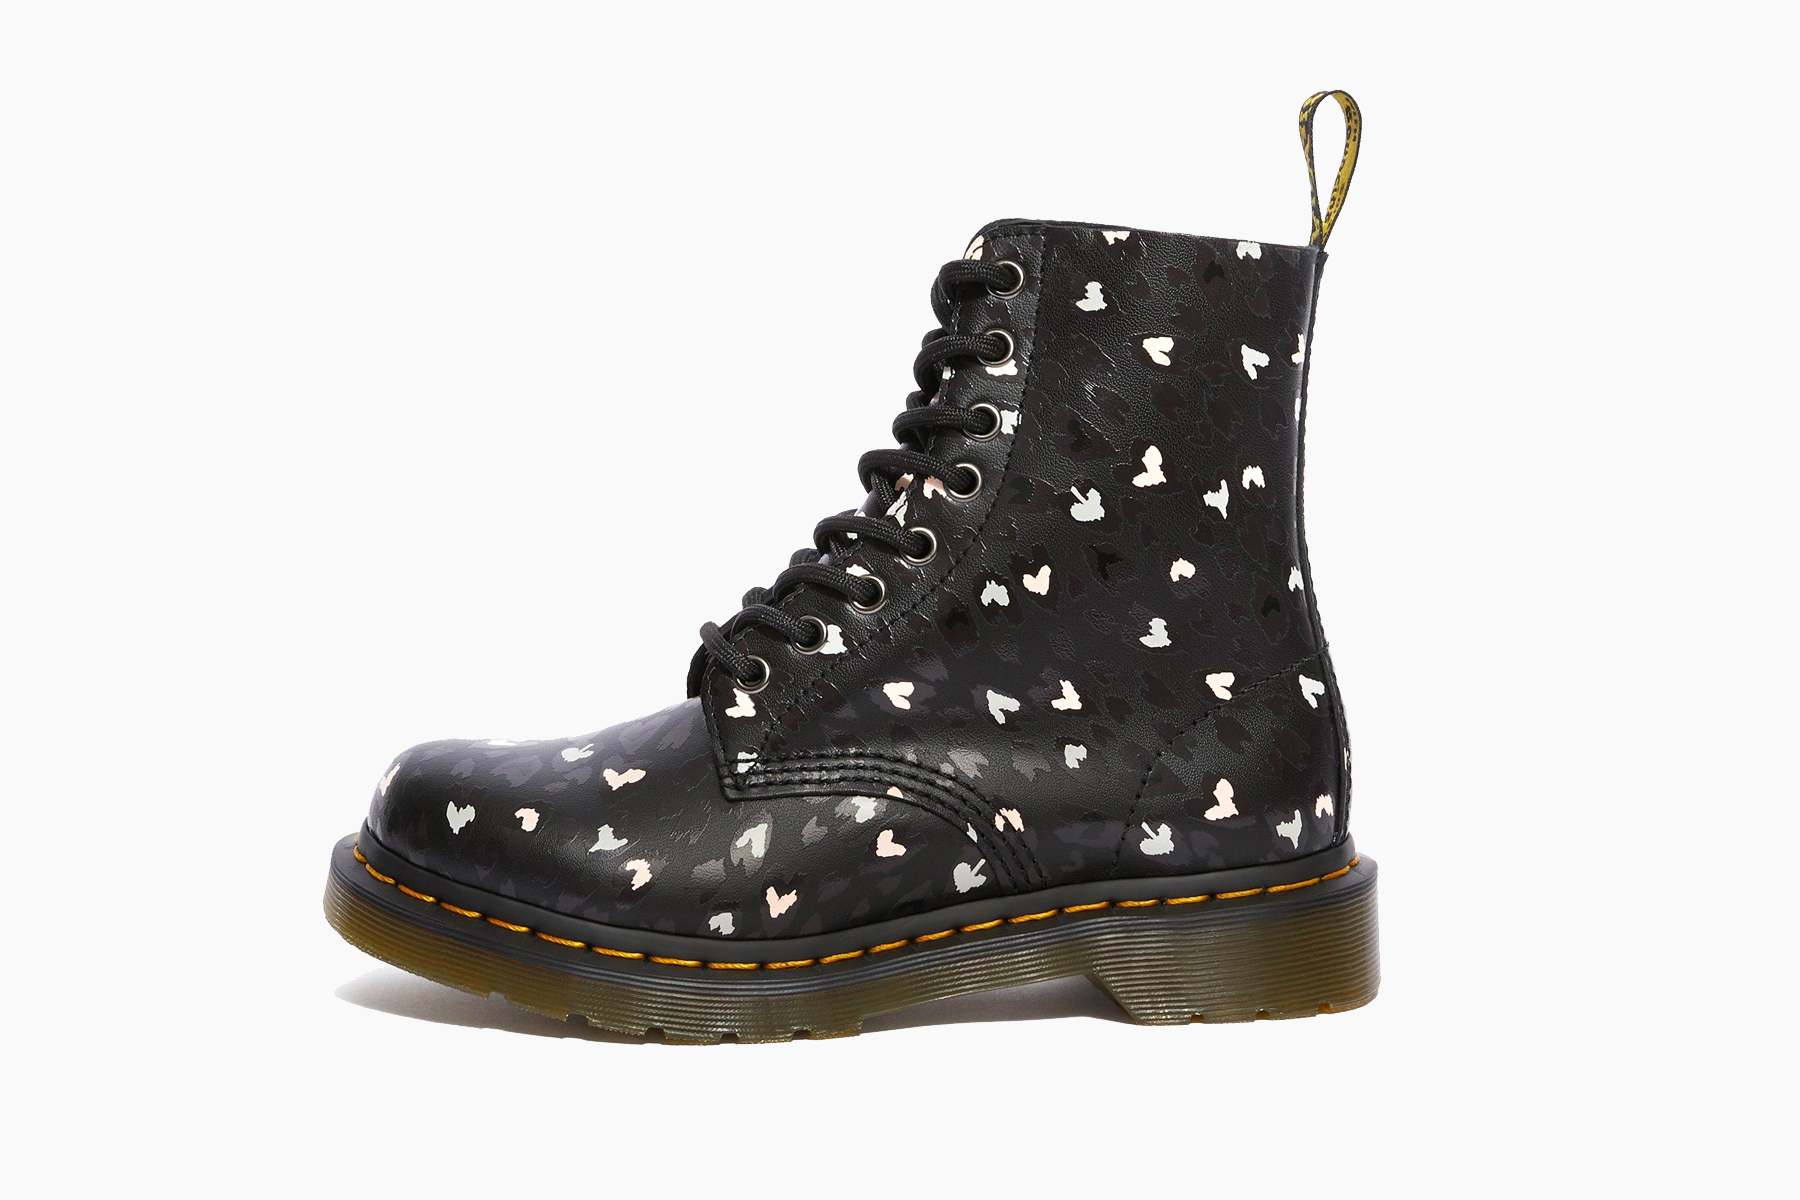 Dr. Martens "Wild Hearts" Valentine's Day Collection Hypebeast